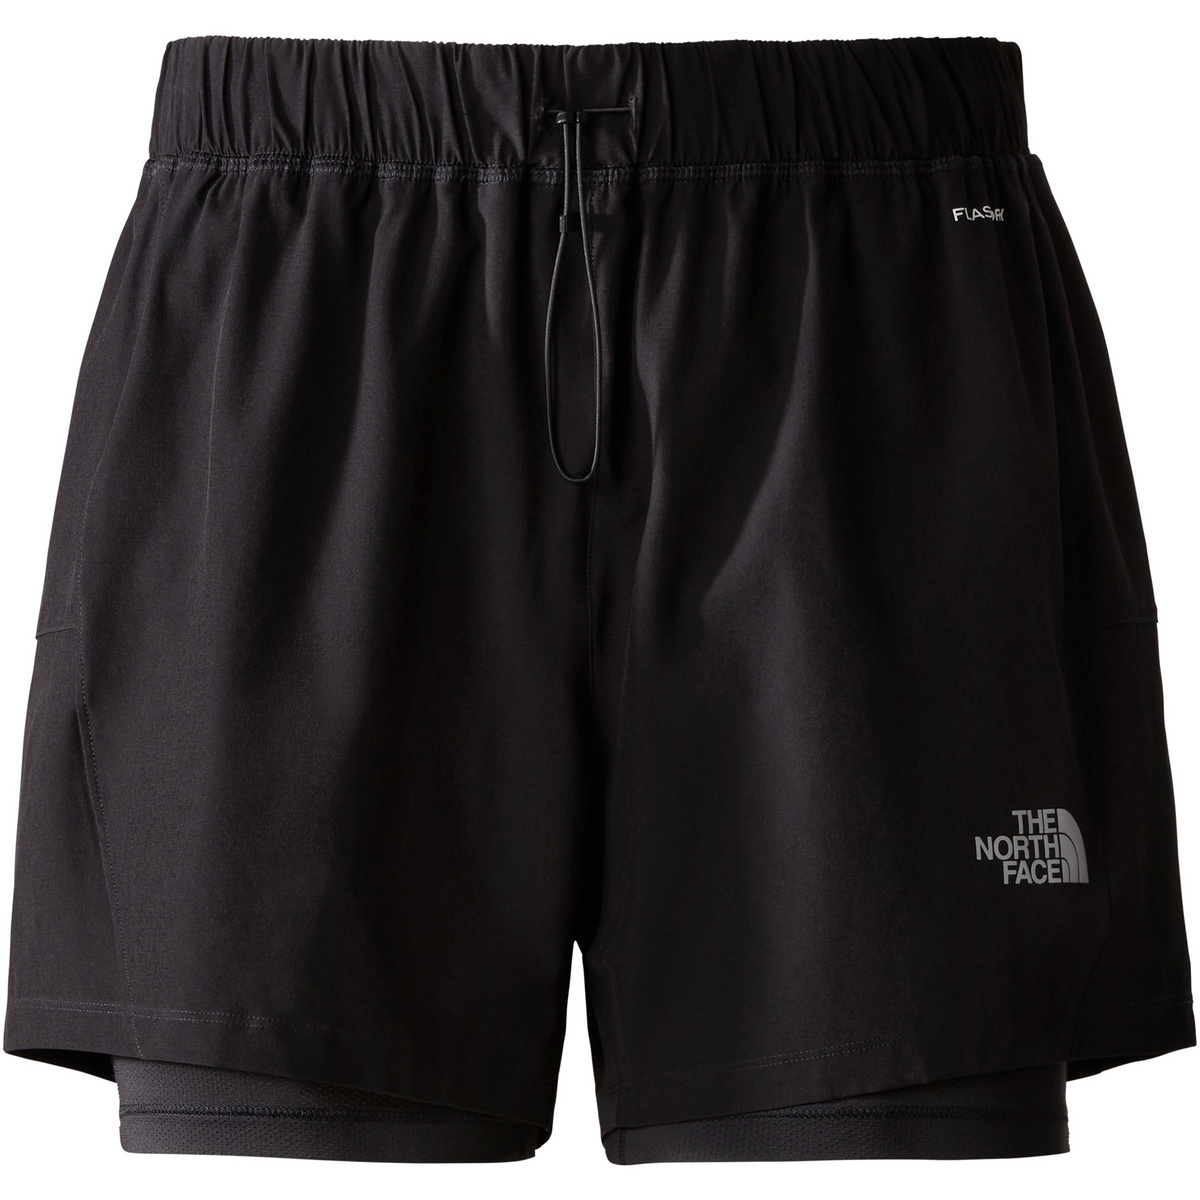 The North Face Damen 2 In 1 Shorts von The North Face